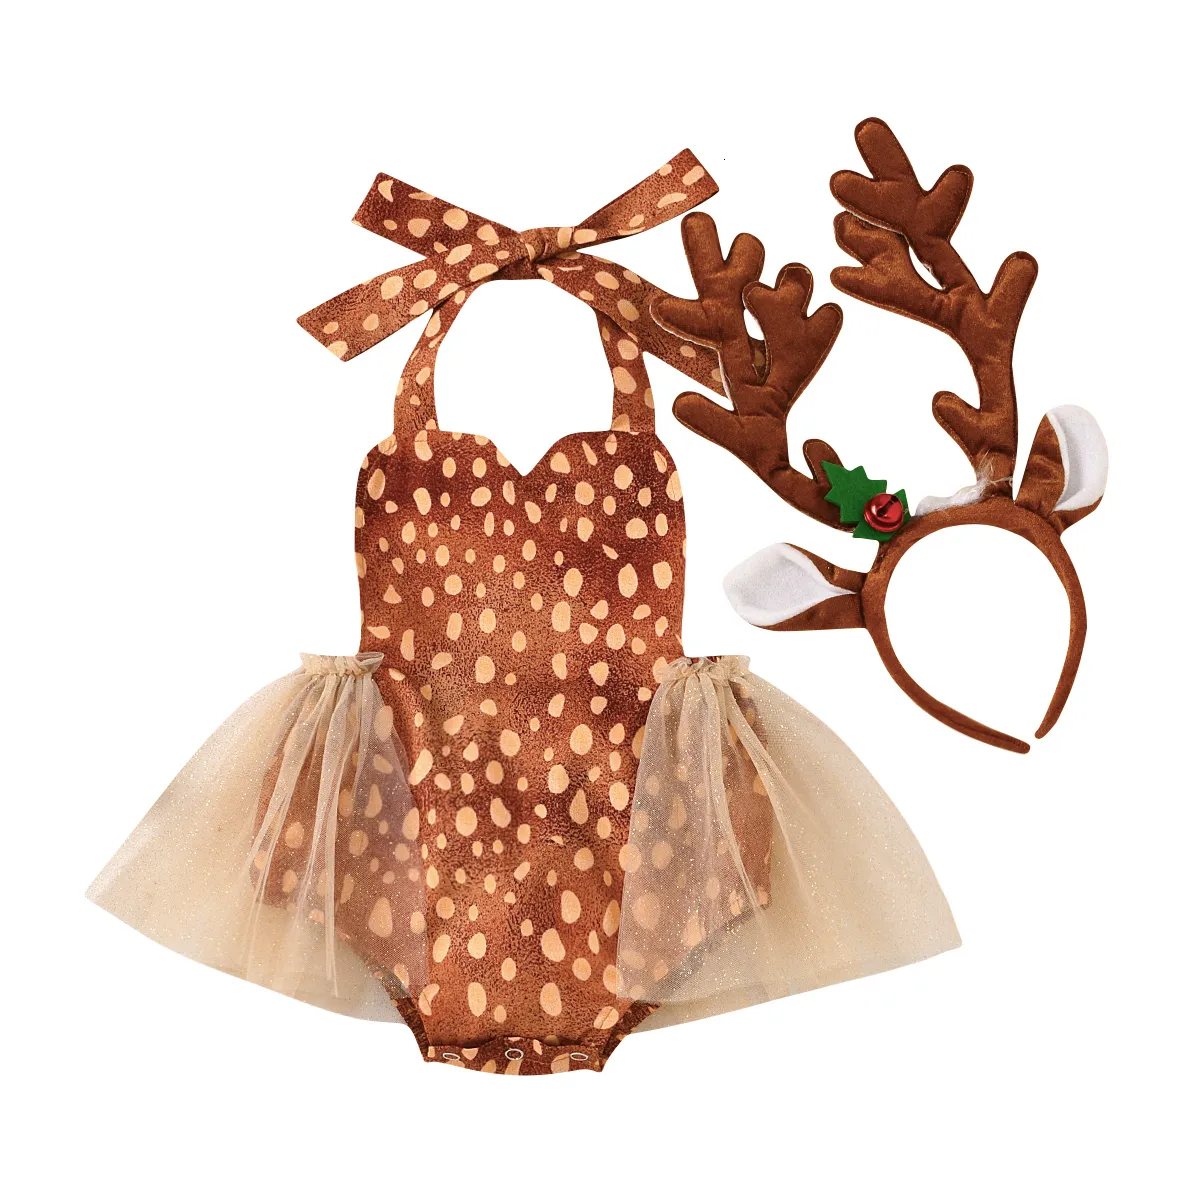 Clothing Sets born Infant Baby Girl Xmas Deer Outfits Bodysuits Overall Jumpsuit Christmas Outfits Costume Antlers headband Outfits 024M 230303